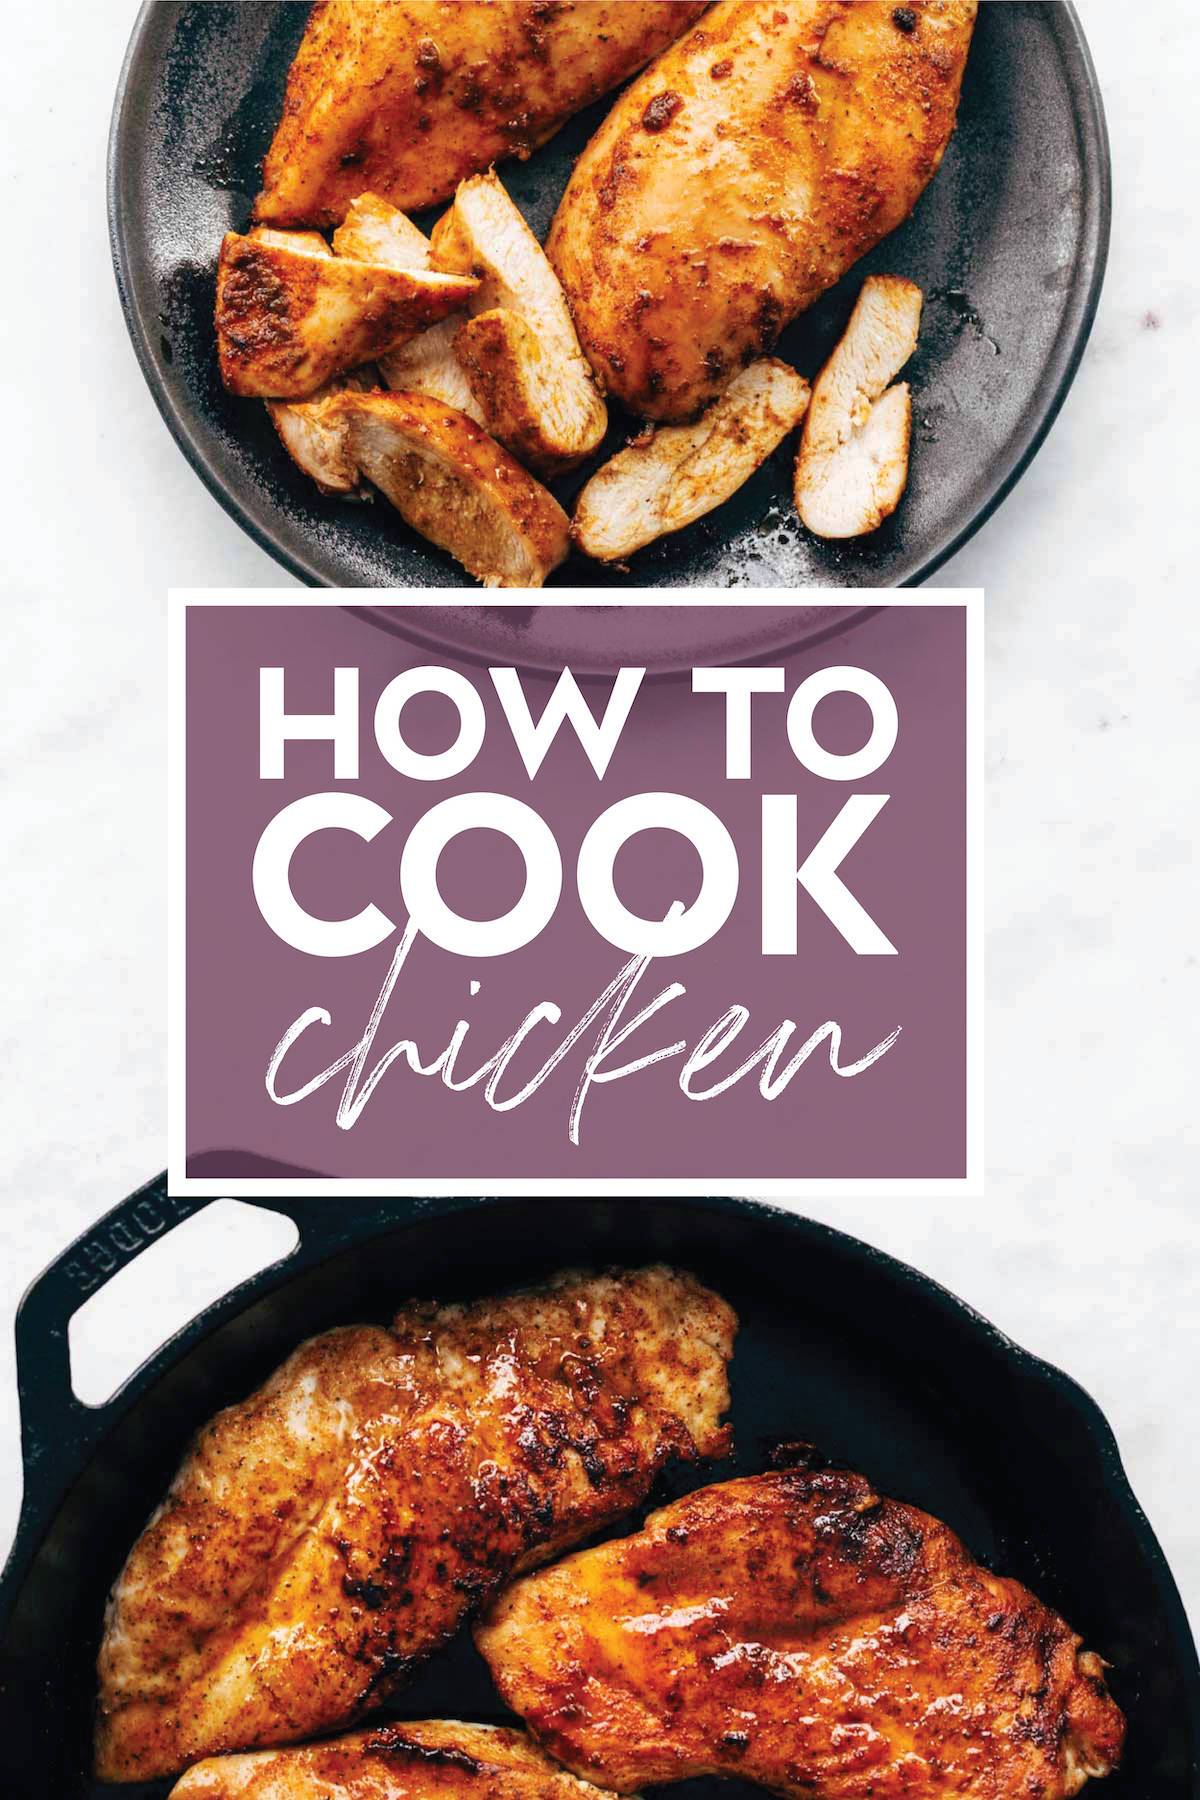 Title image that says "How To Cook Chicken".